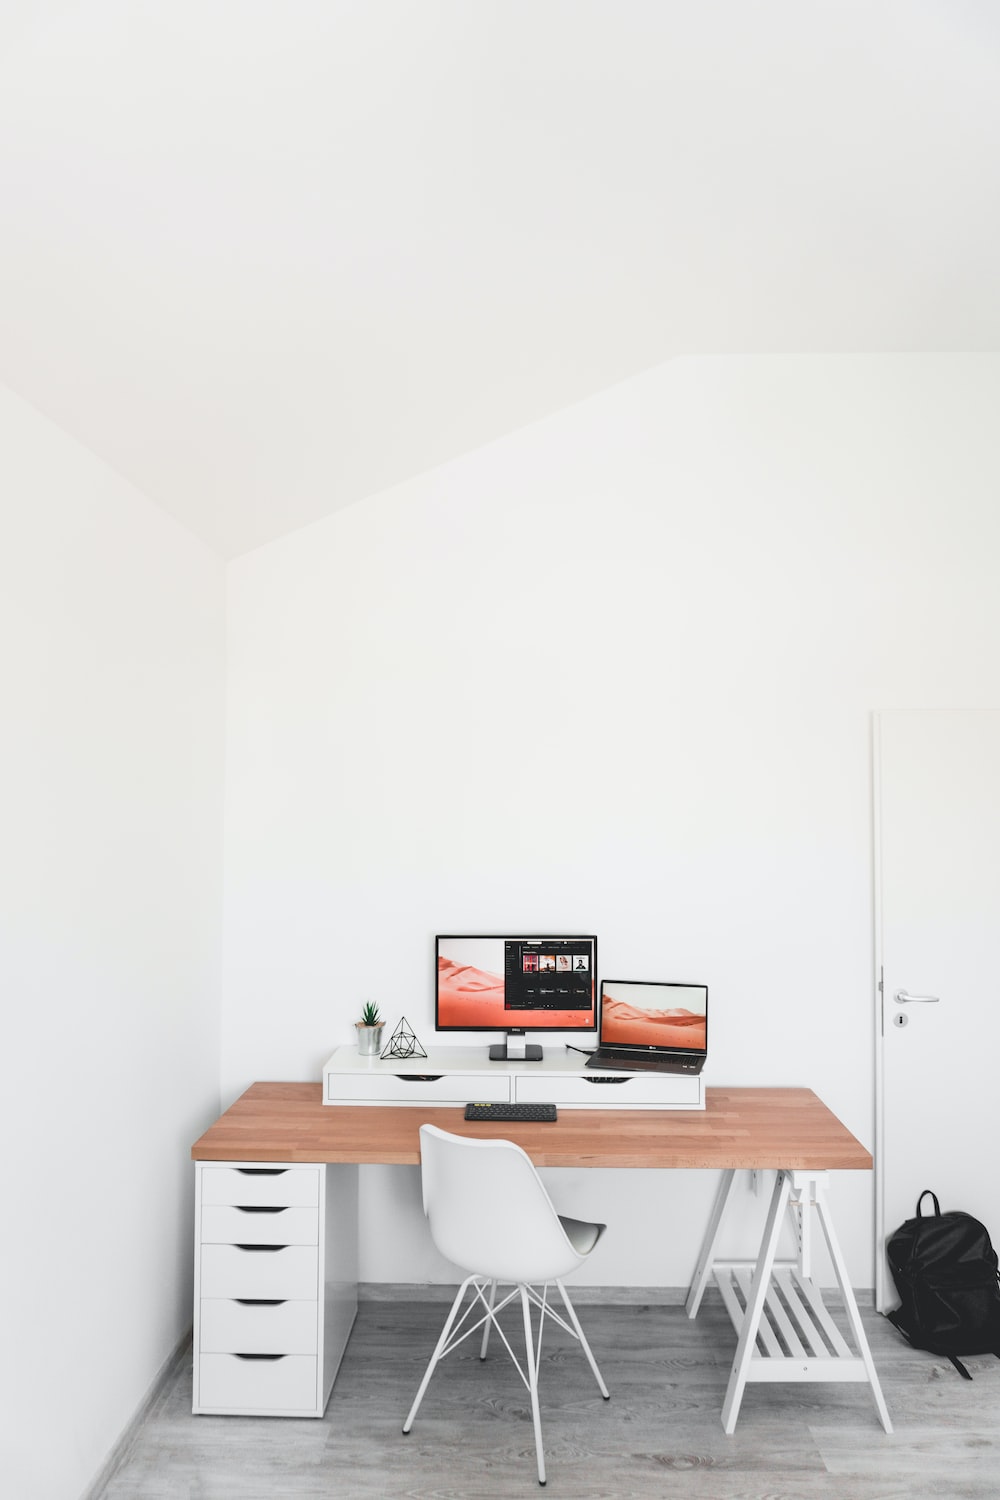 What is modular office table?